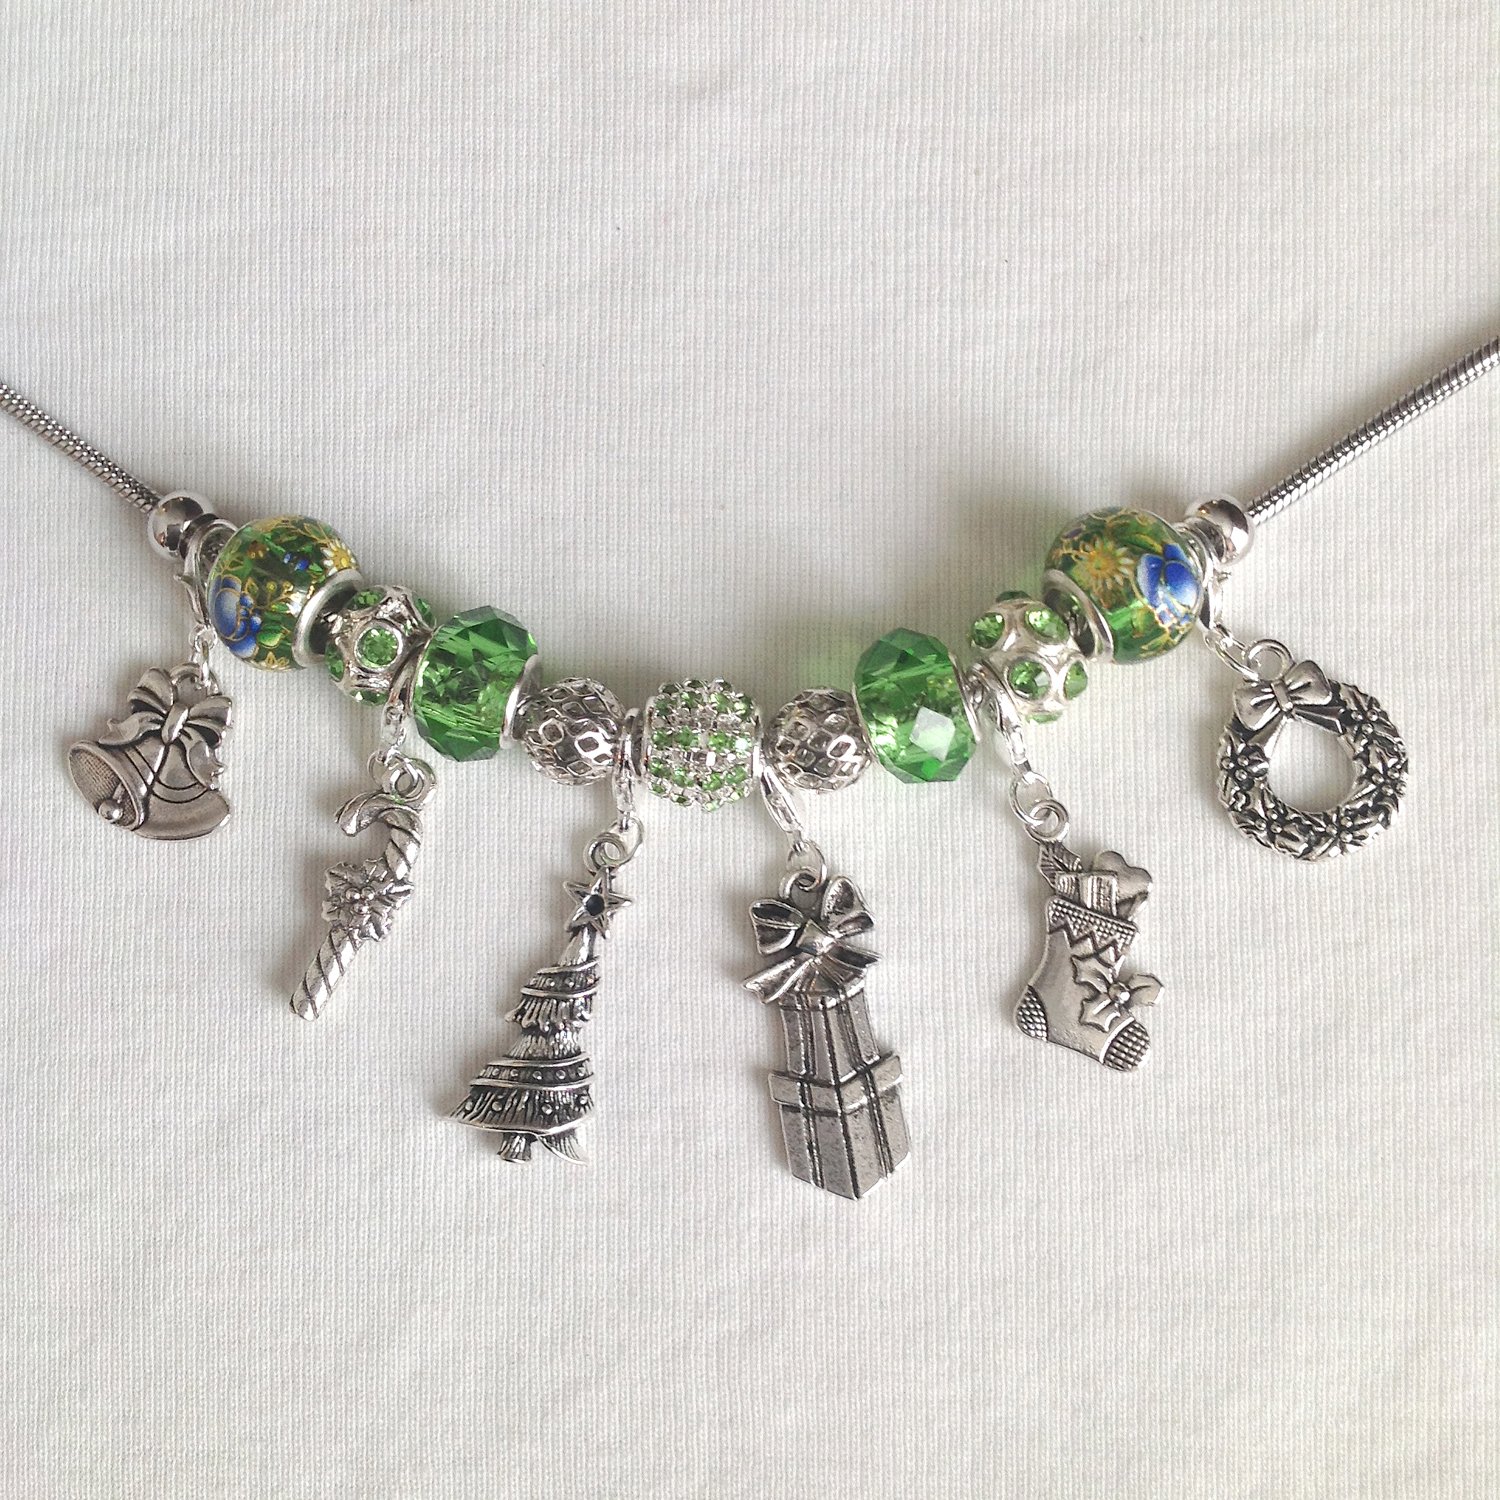  Christmas Memories European Style Charm Bracelet in Silver and Green